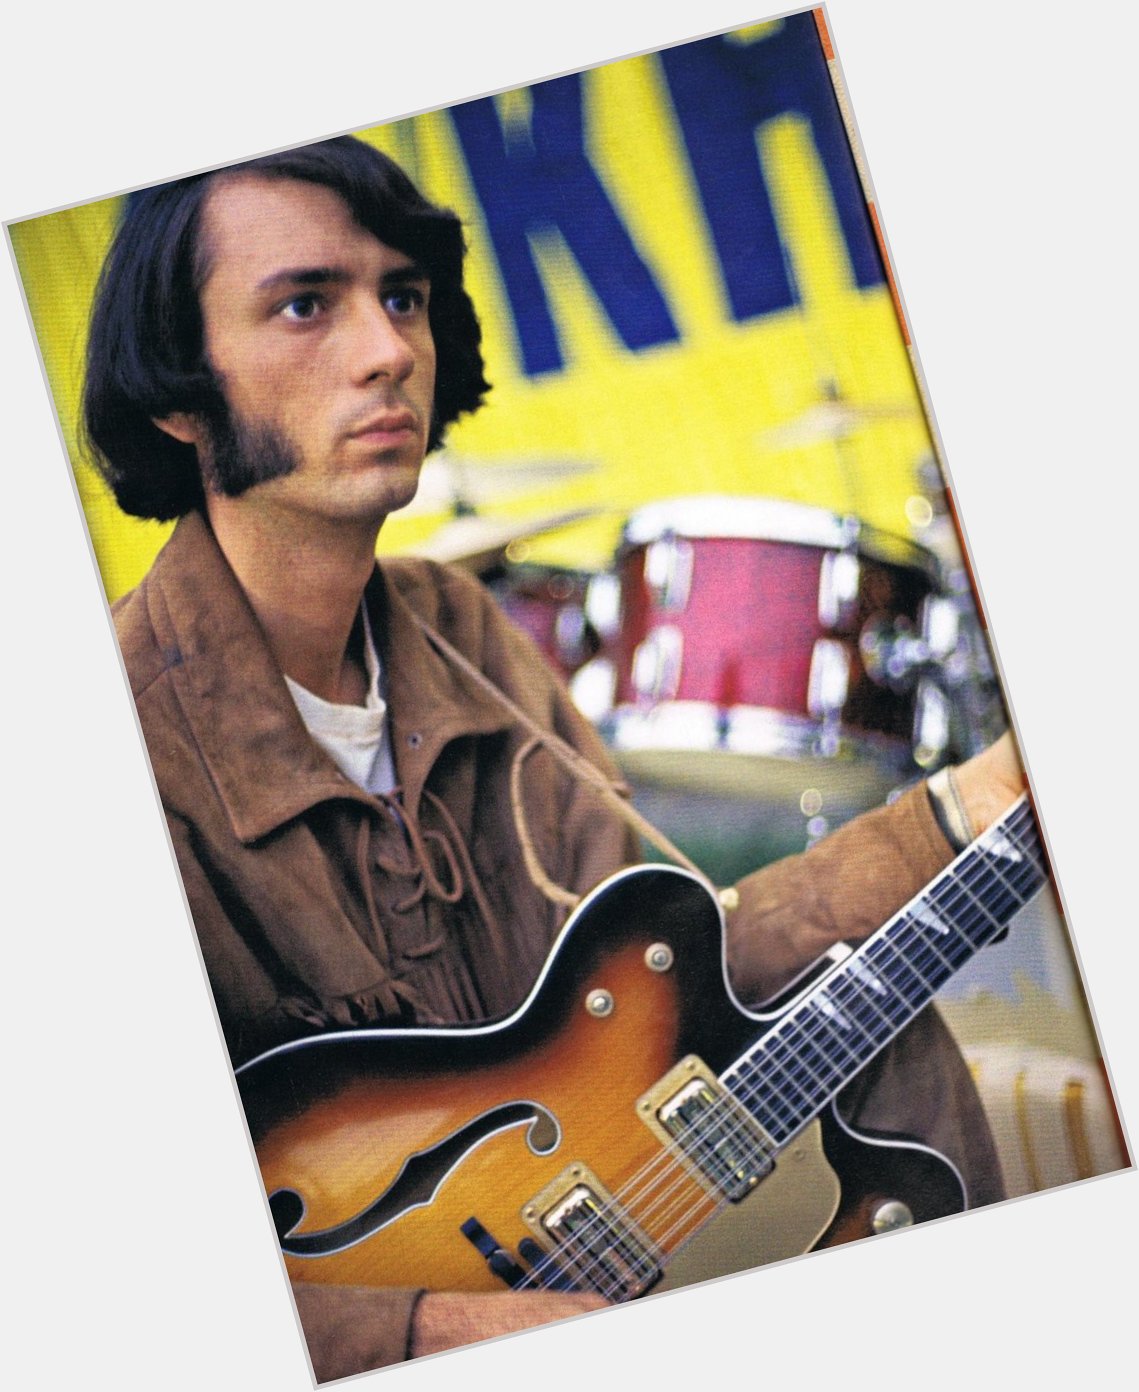 Happy Birthday to Monkees guitarist and songwriter Michael Nesmith, born on this day in Houston, Texas in 1942.   